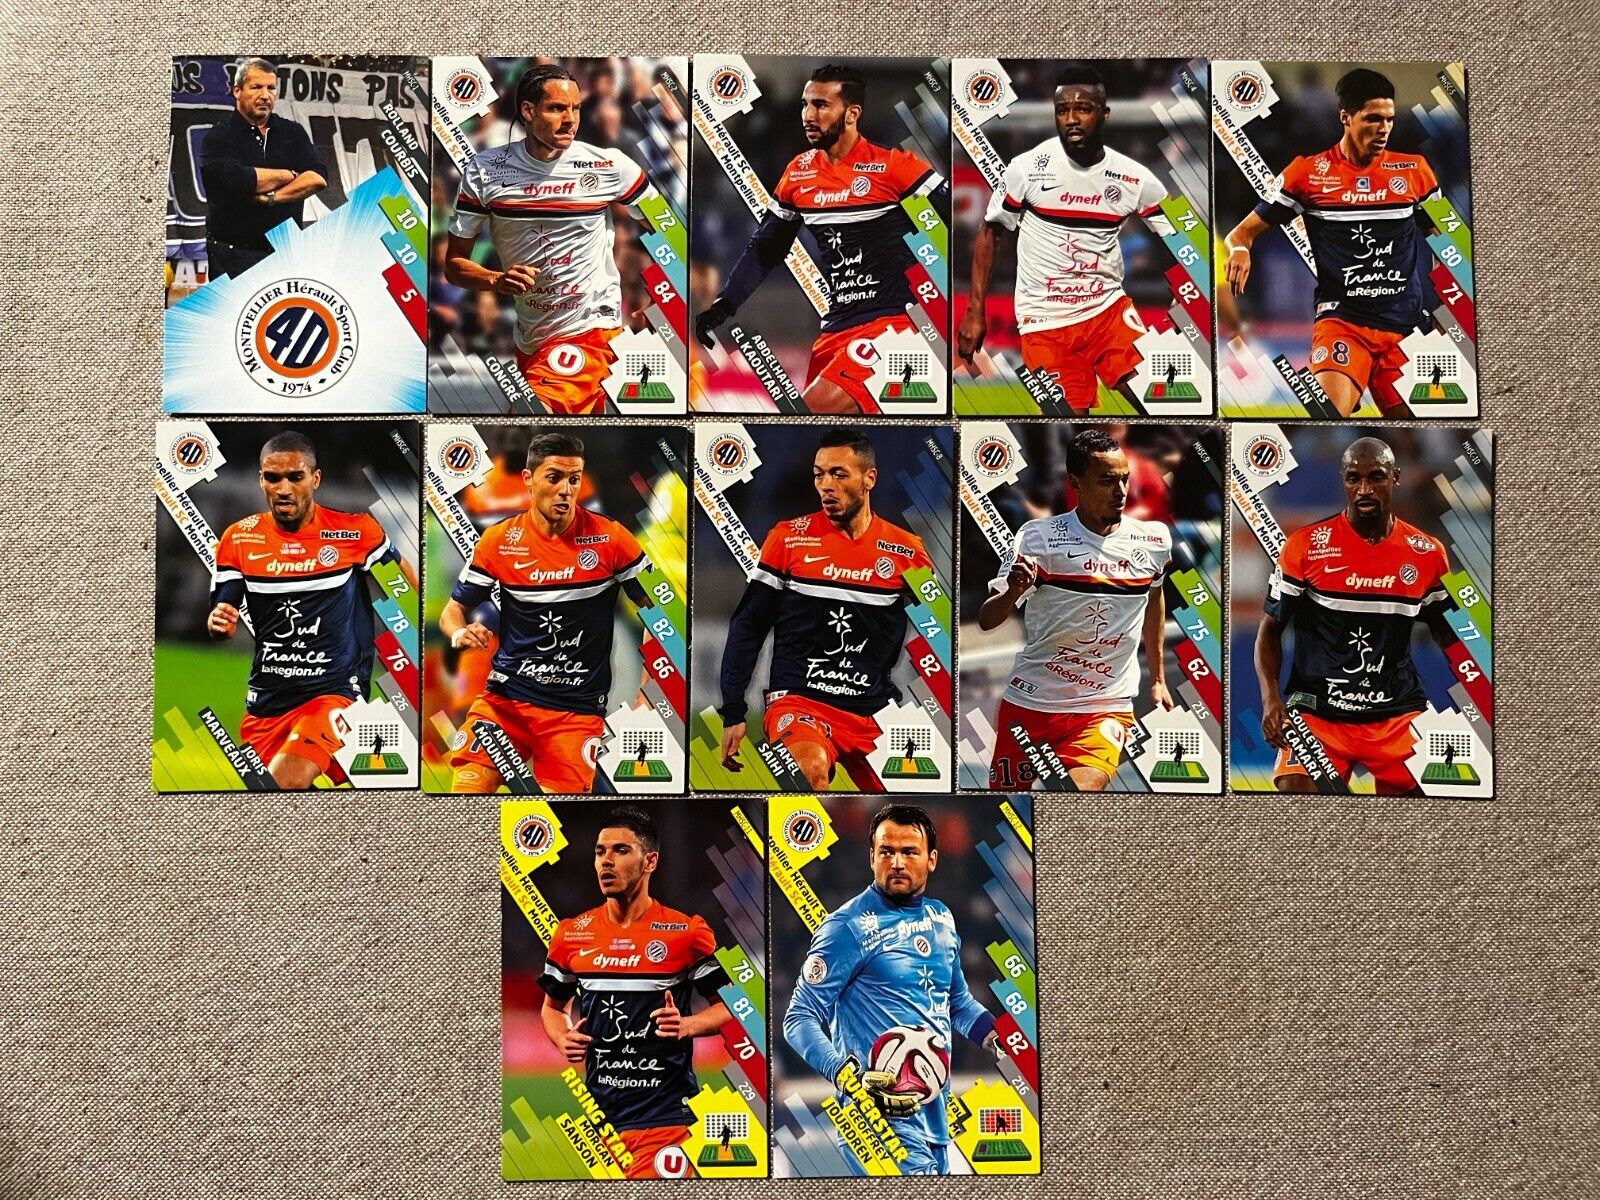 LOT 12 PANINI ADRENALYN XL FOOT 2014/15 TEAM MONTPELLIER MINT ROOKIE CARDS